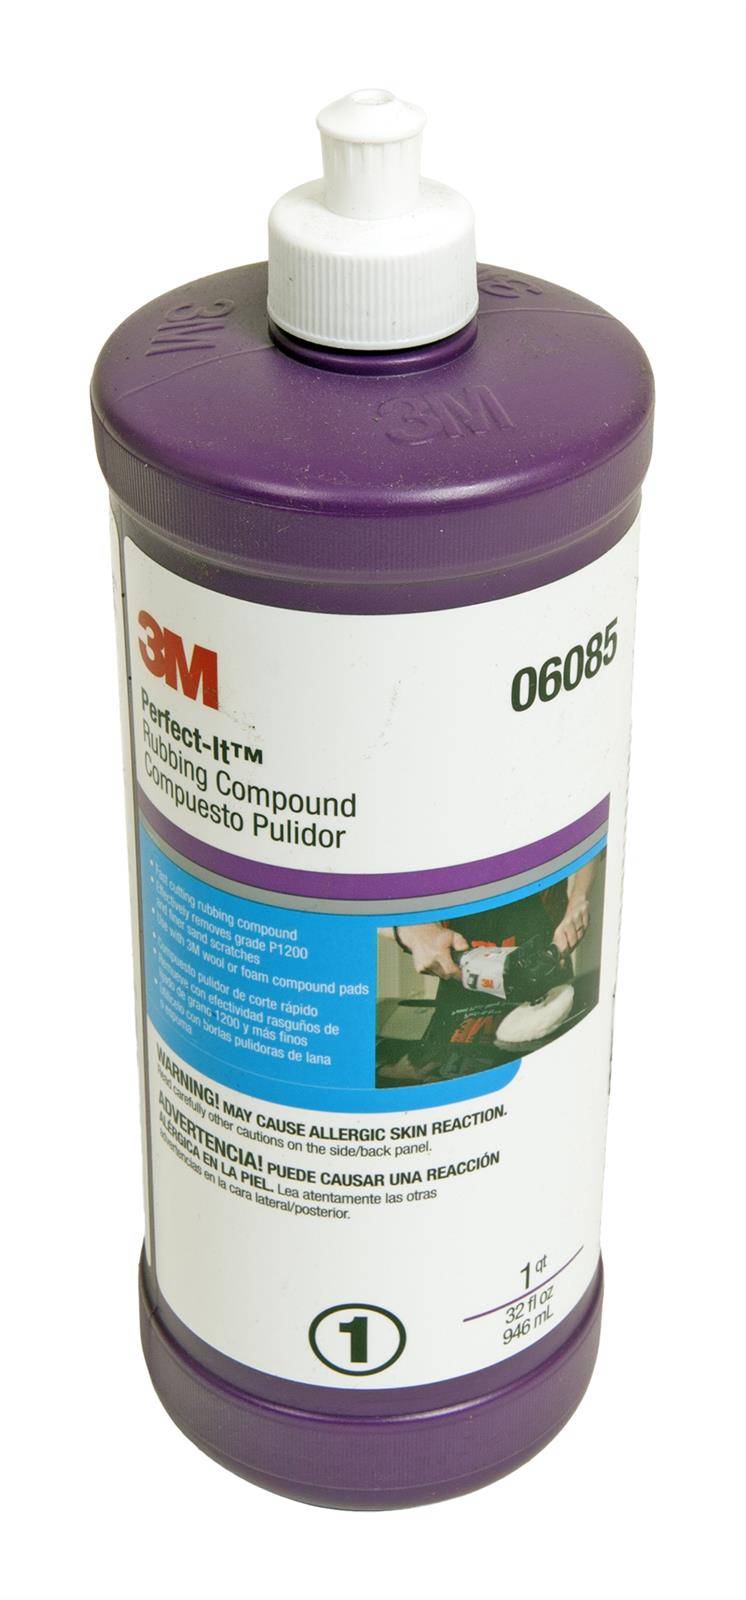 3M 60455073654 3M Products Perfect-It 3000 Rubbing Compound